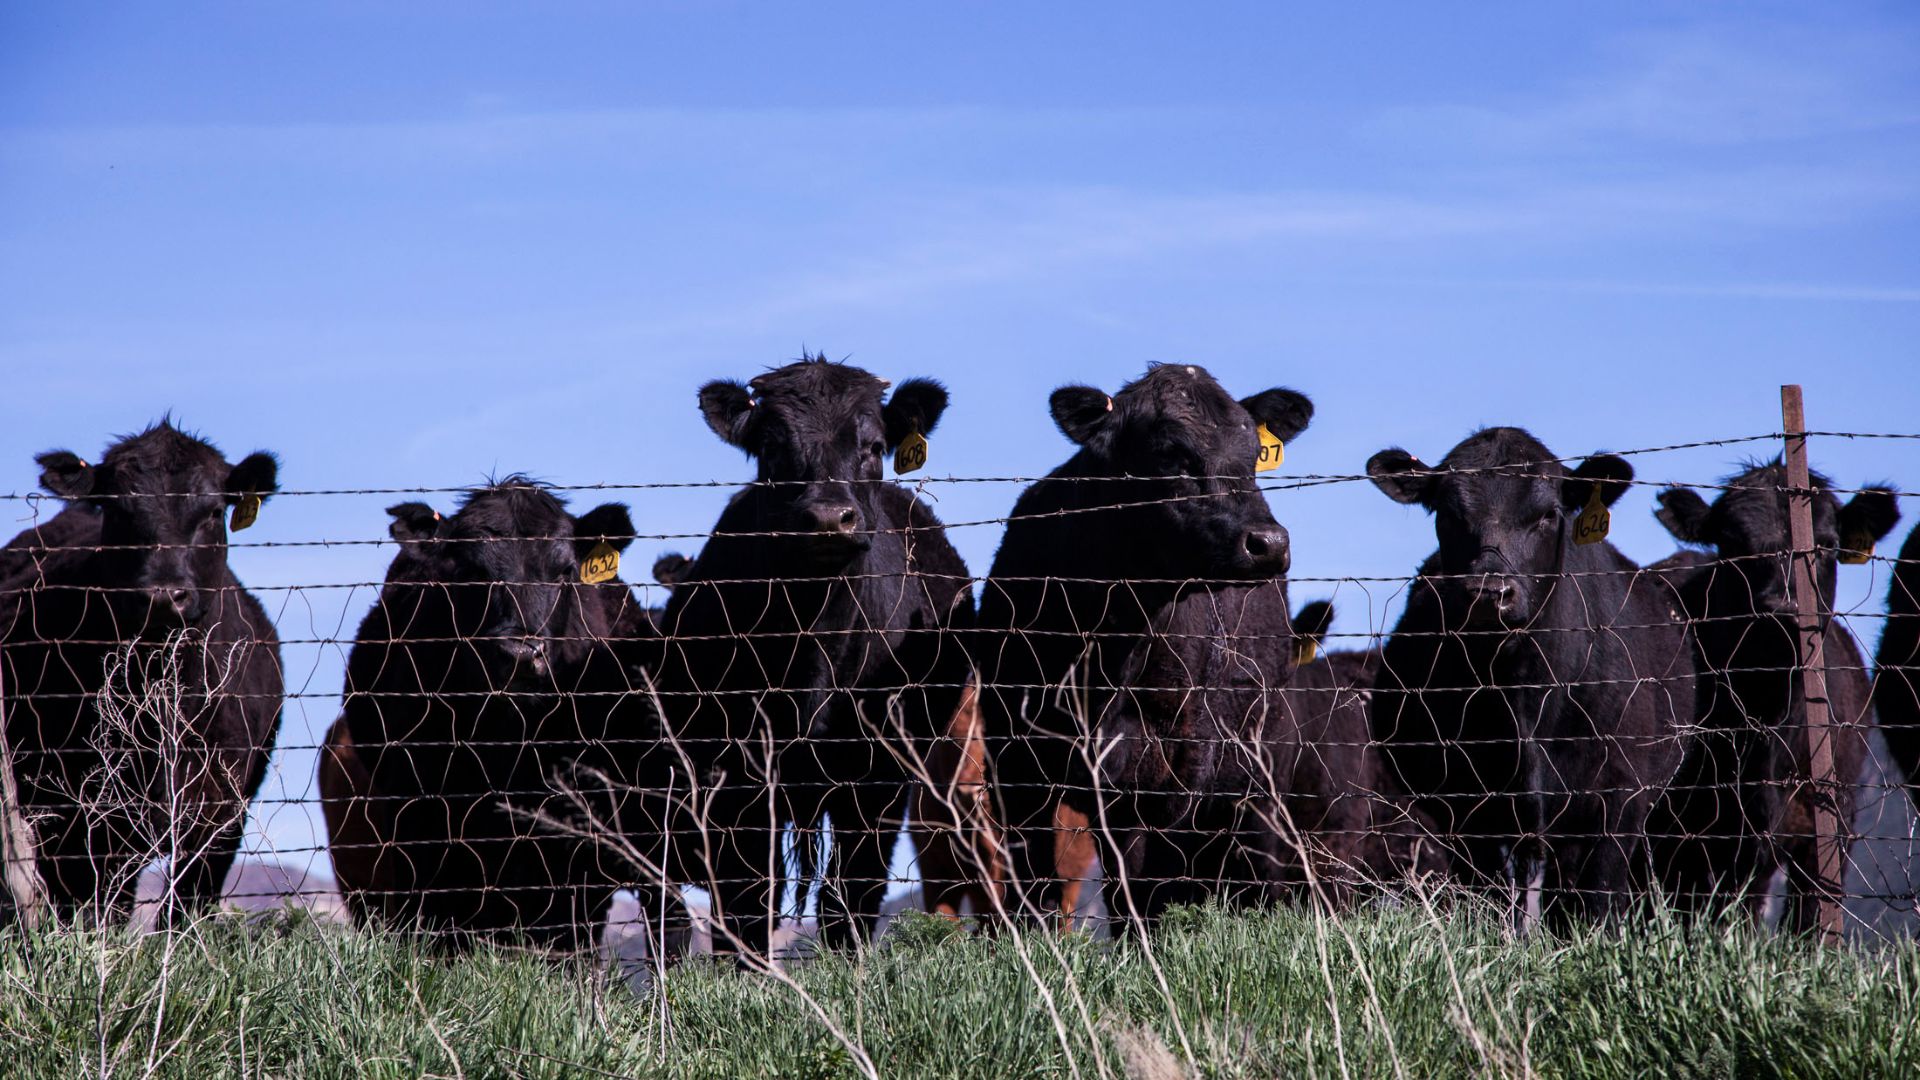 Cows in a field behind a wire fence